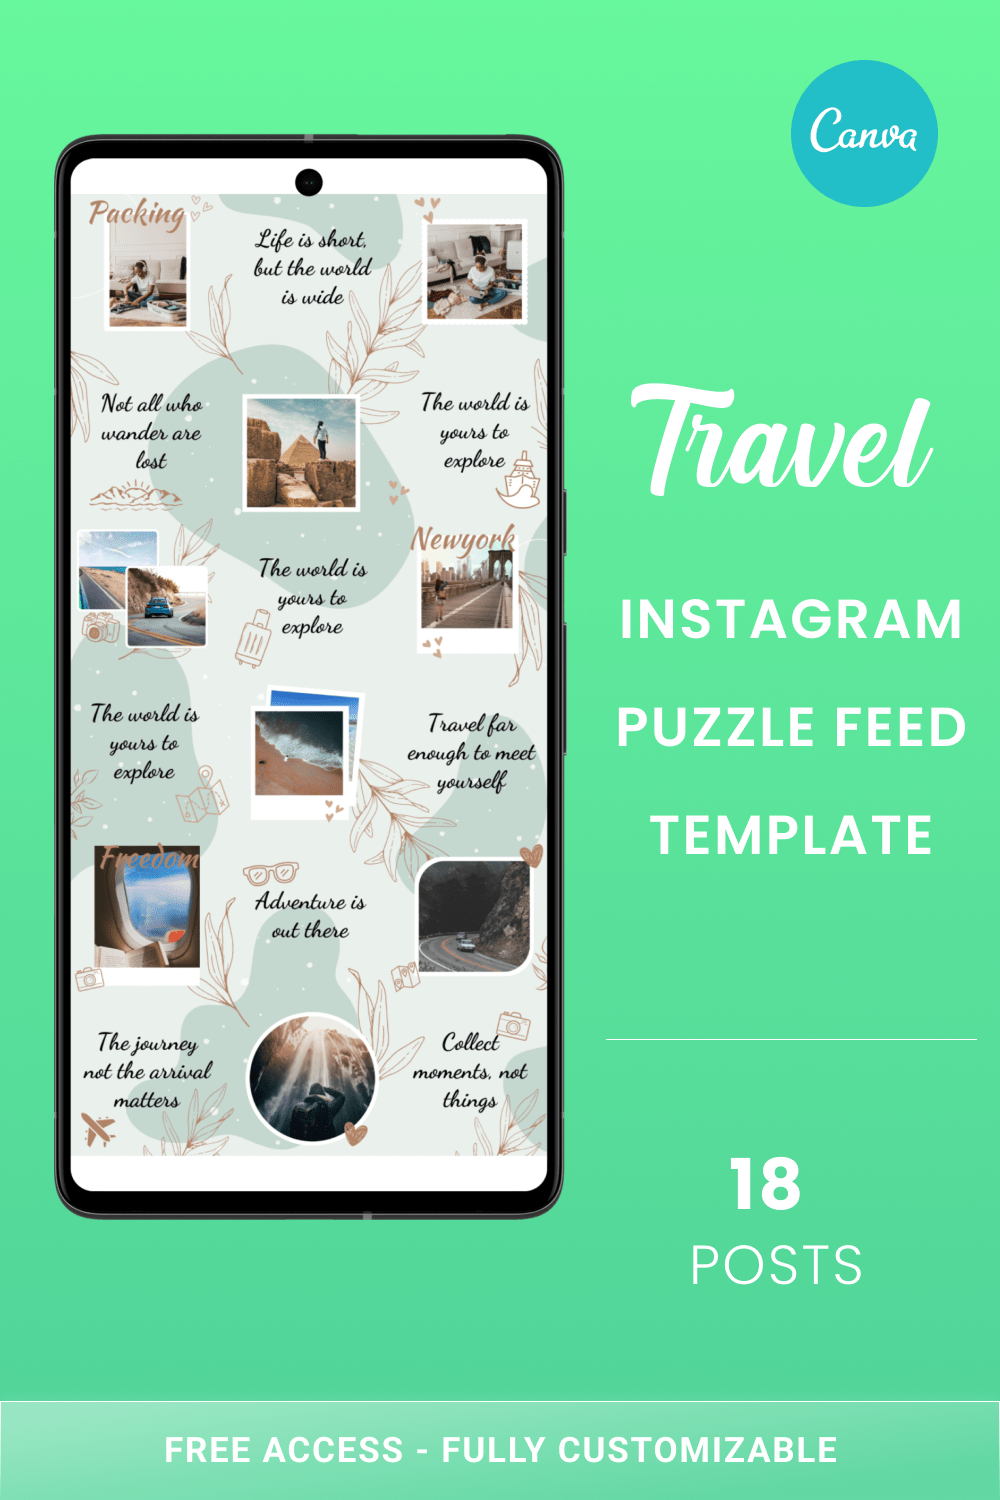 Travel Instagram Puzzle Feed Canva Template - 18 Instagram Posts pinterest preview image.